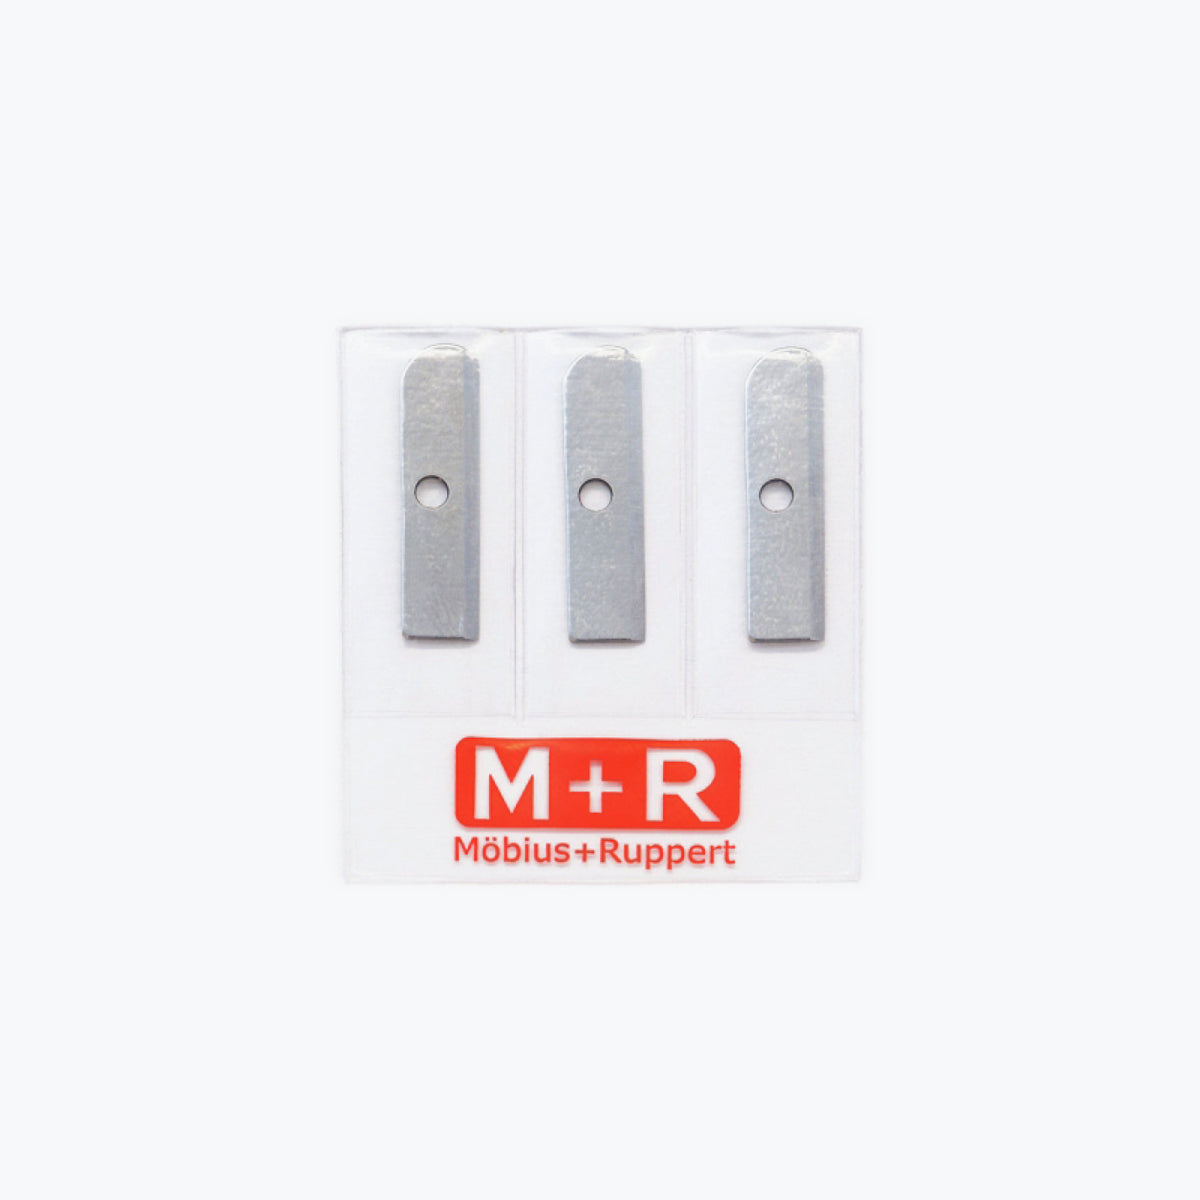 M+R - Replacement Blades - 6070 (Granate)